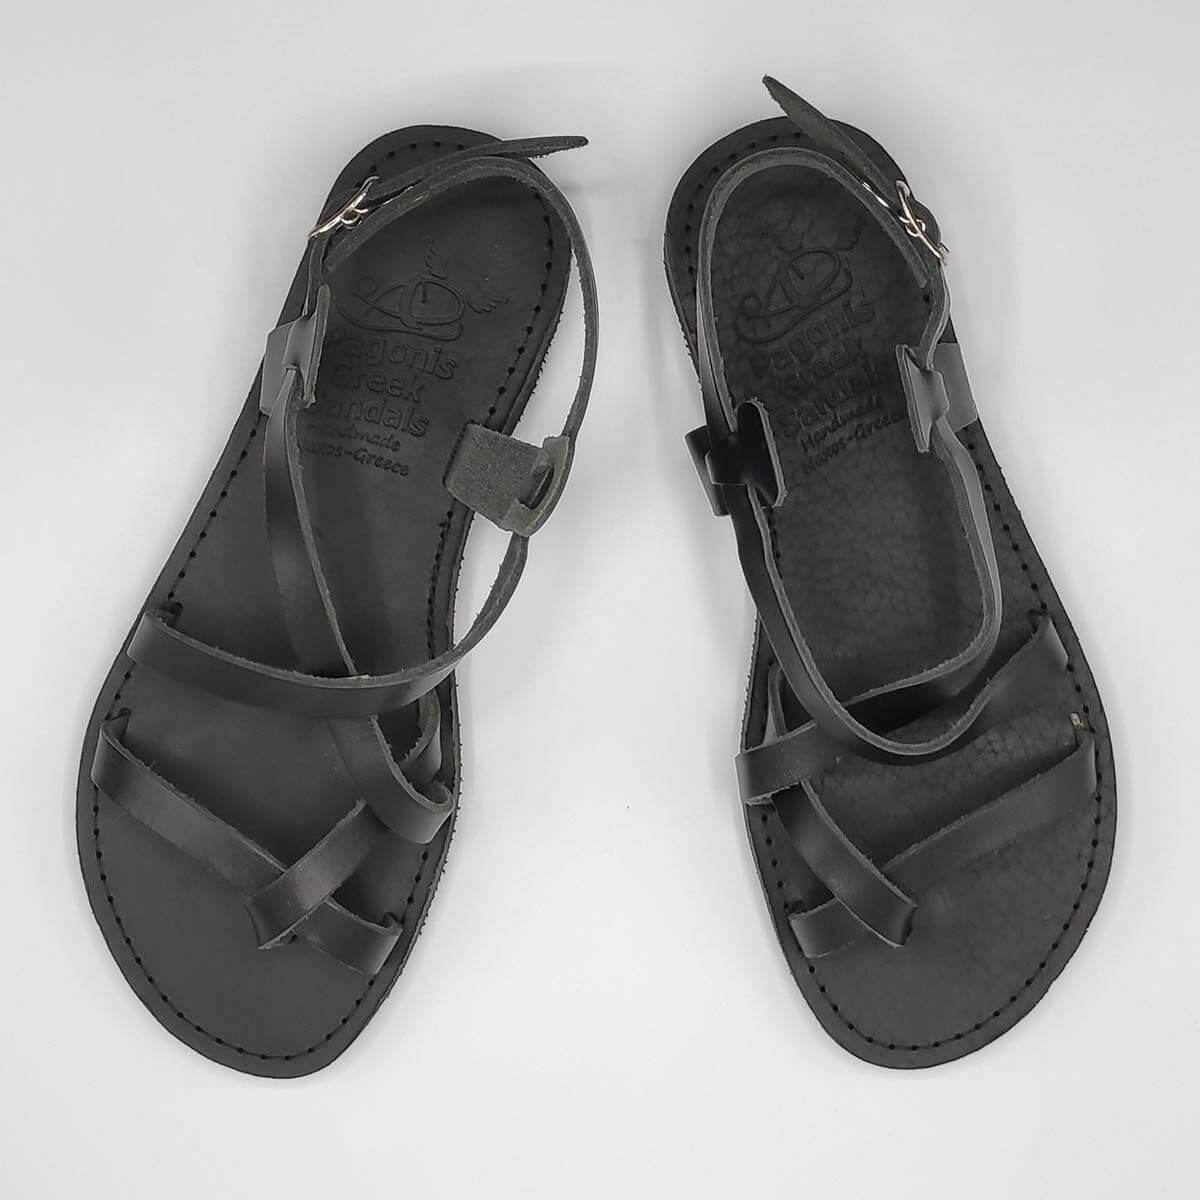 AMMOS Sandals with Back Strap | Pagonis Greek Sandals